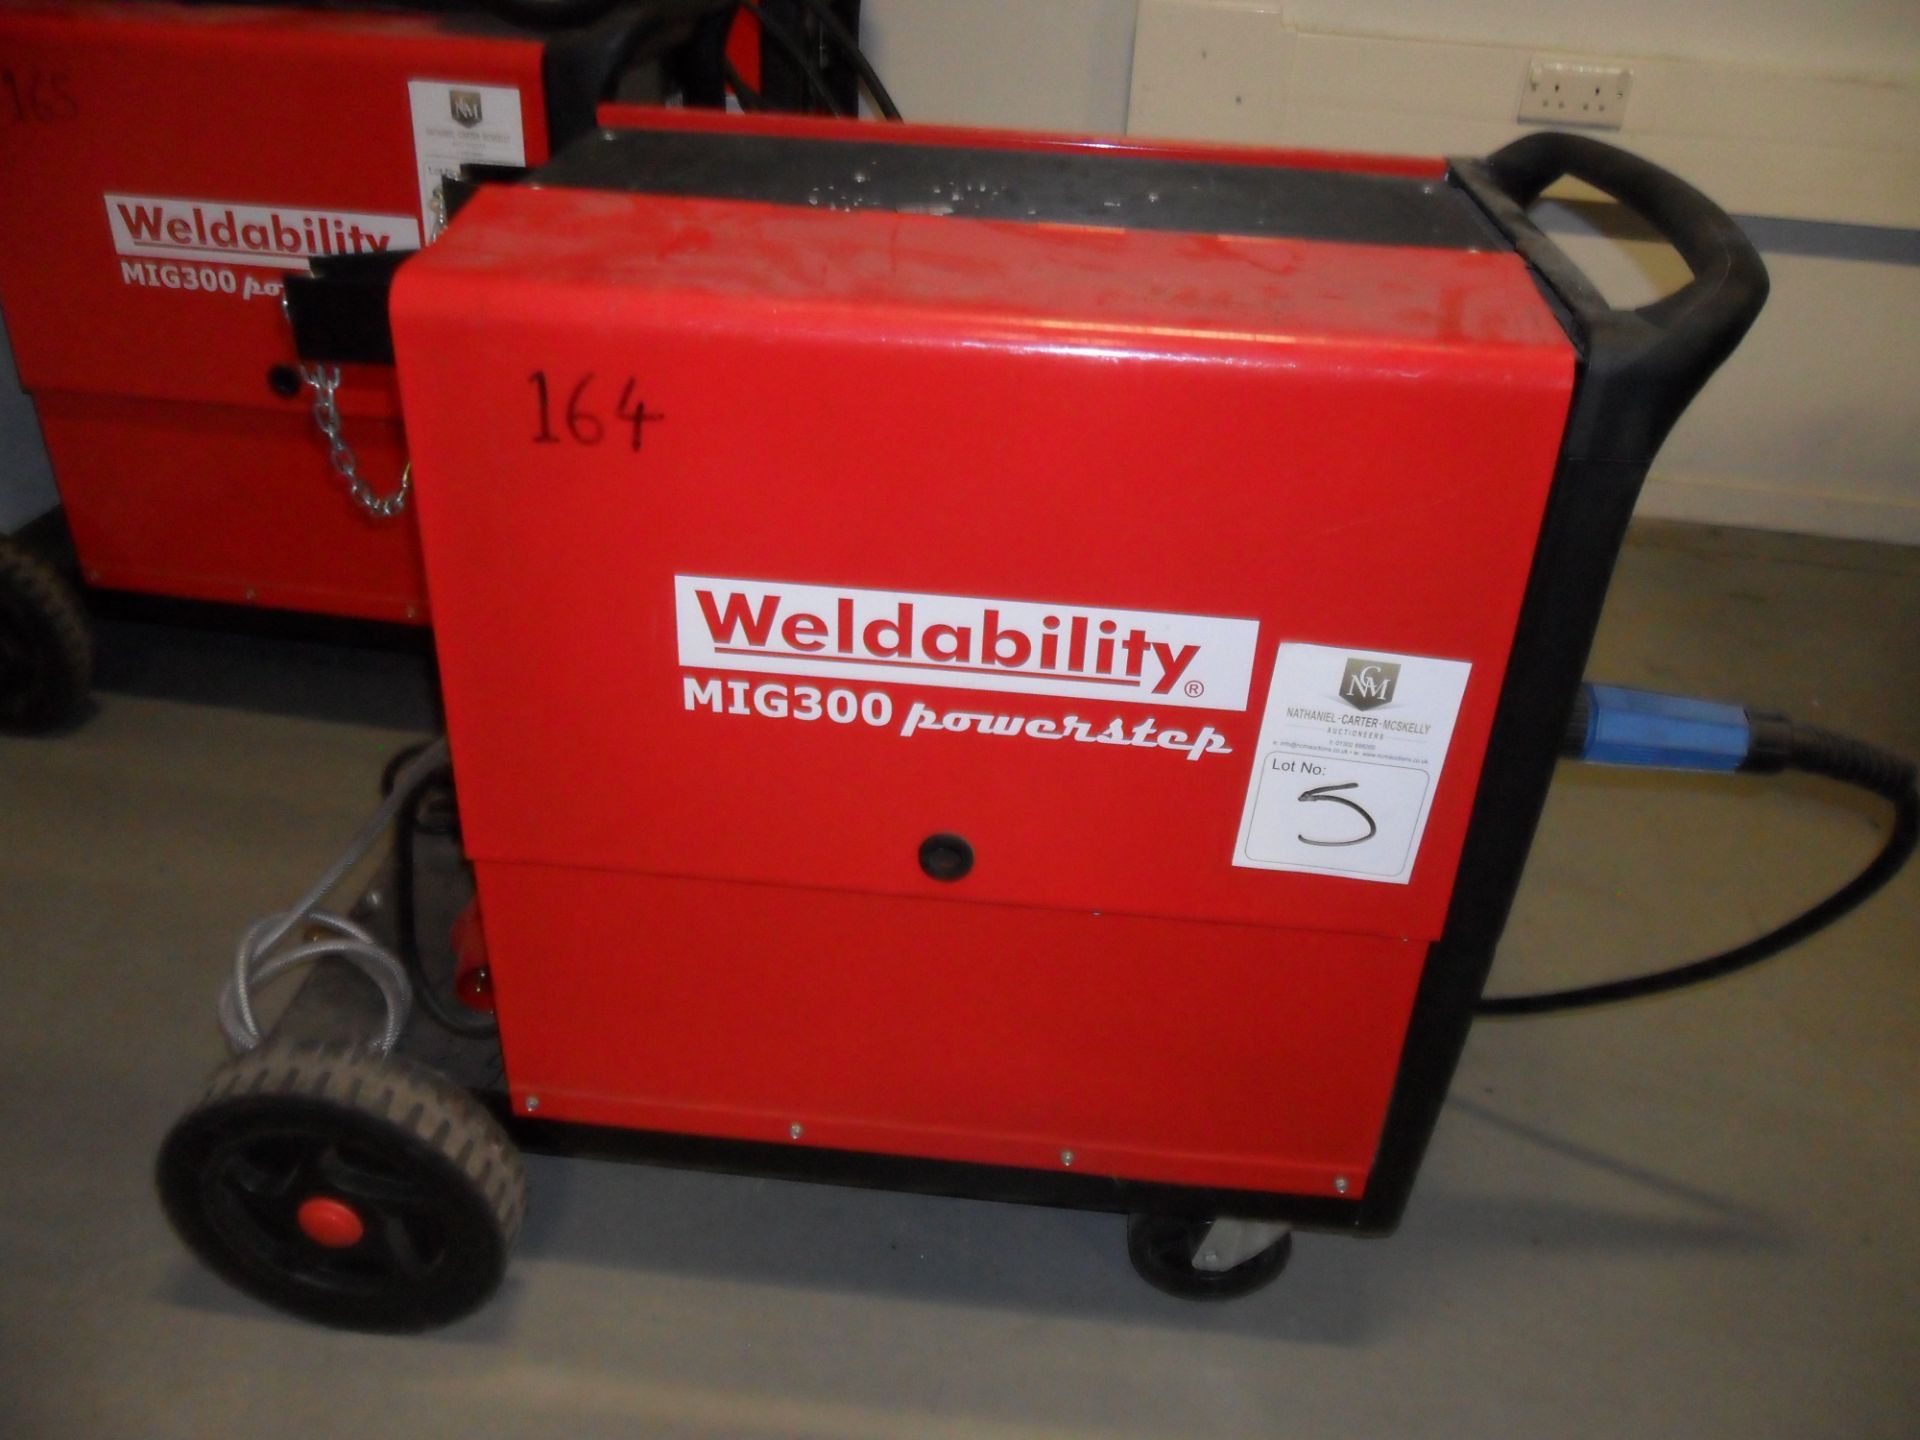 Weldability Mig 300 Powerstep. Welder includes leads and welding torch if shown in photo. - Image 2 of 2